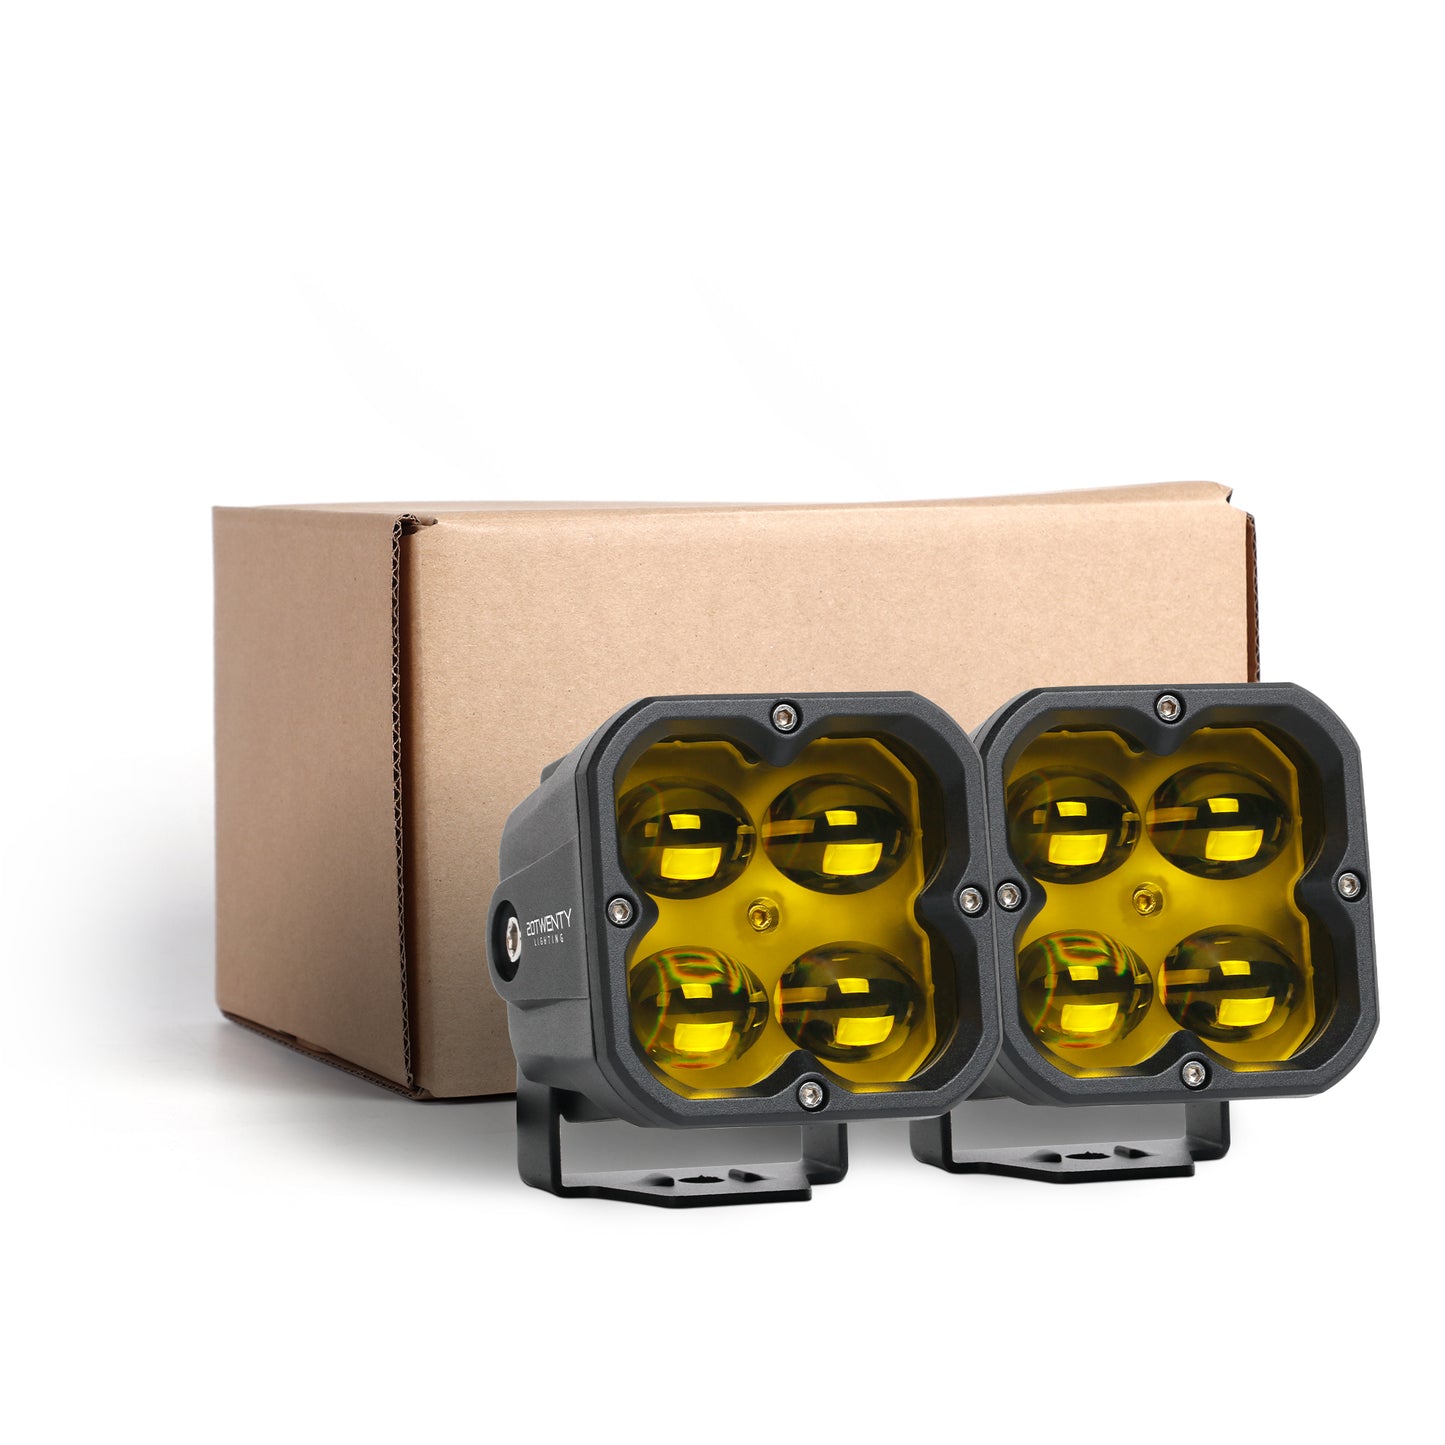 Orion 3" Square Yellow Fog Light Pair with Amber Backlight